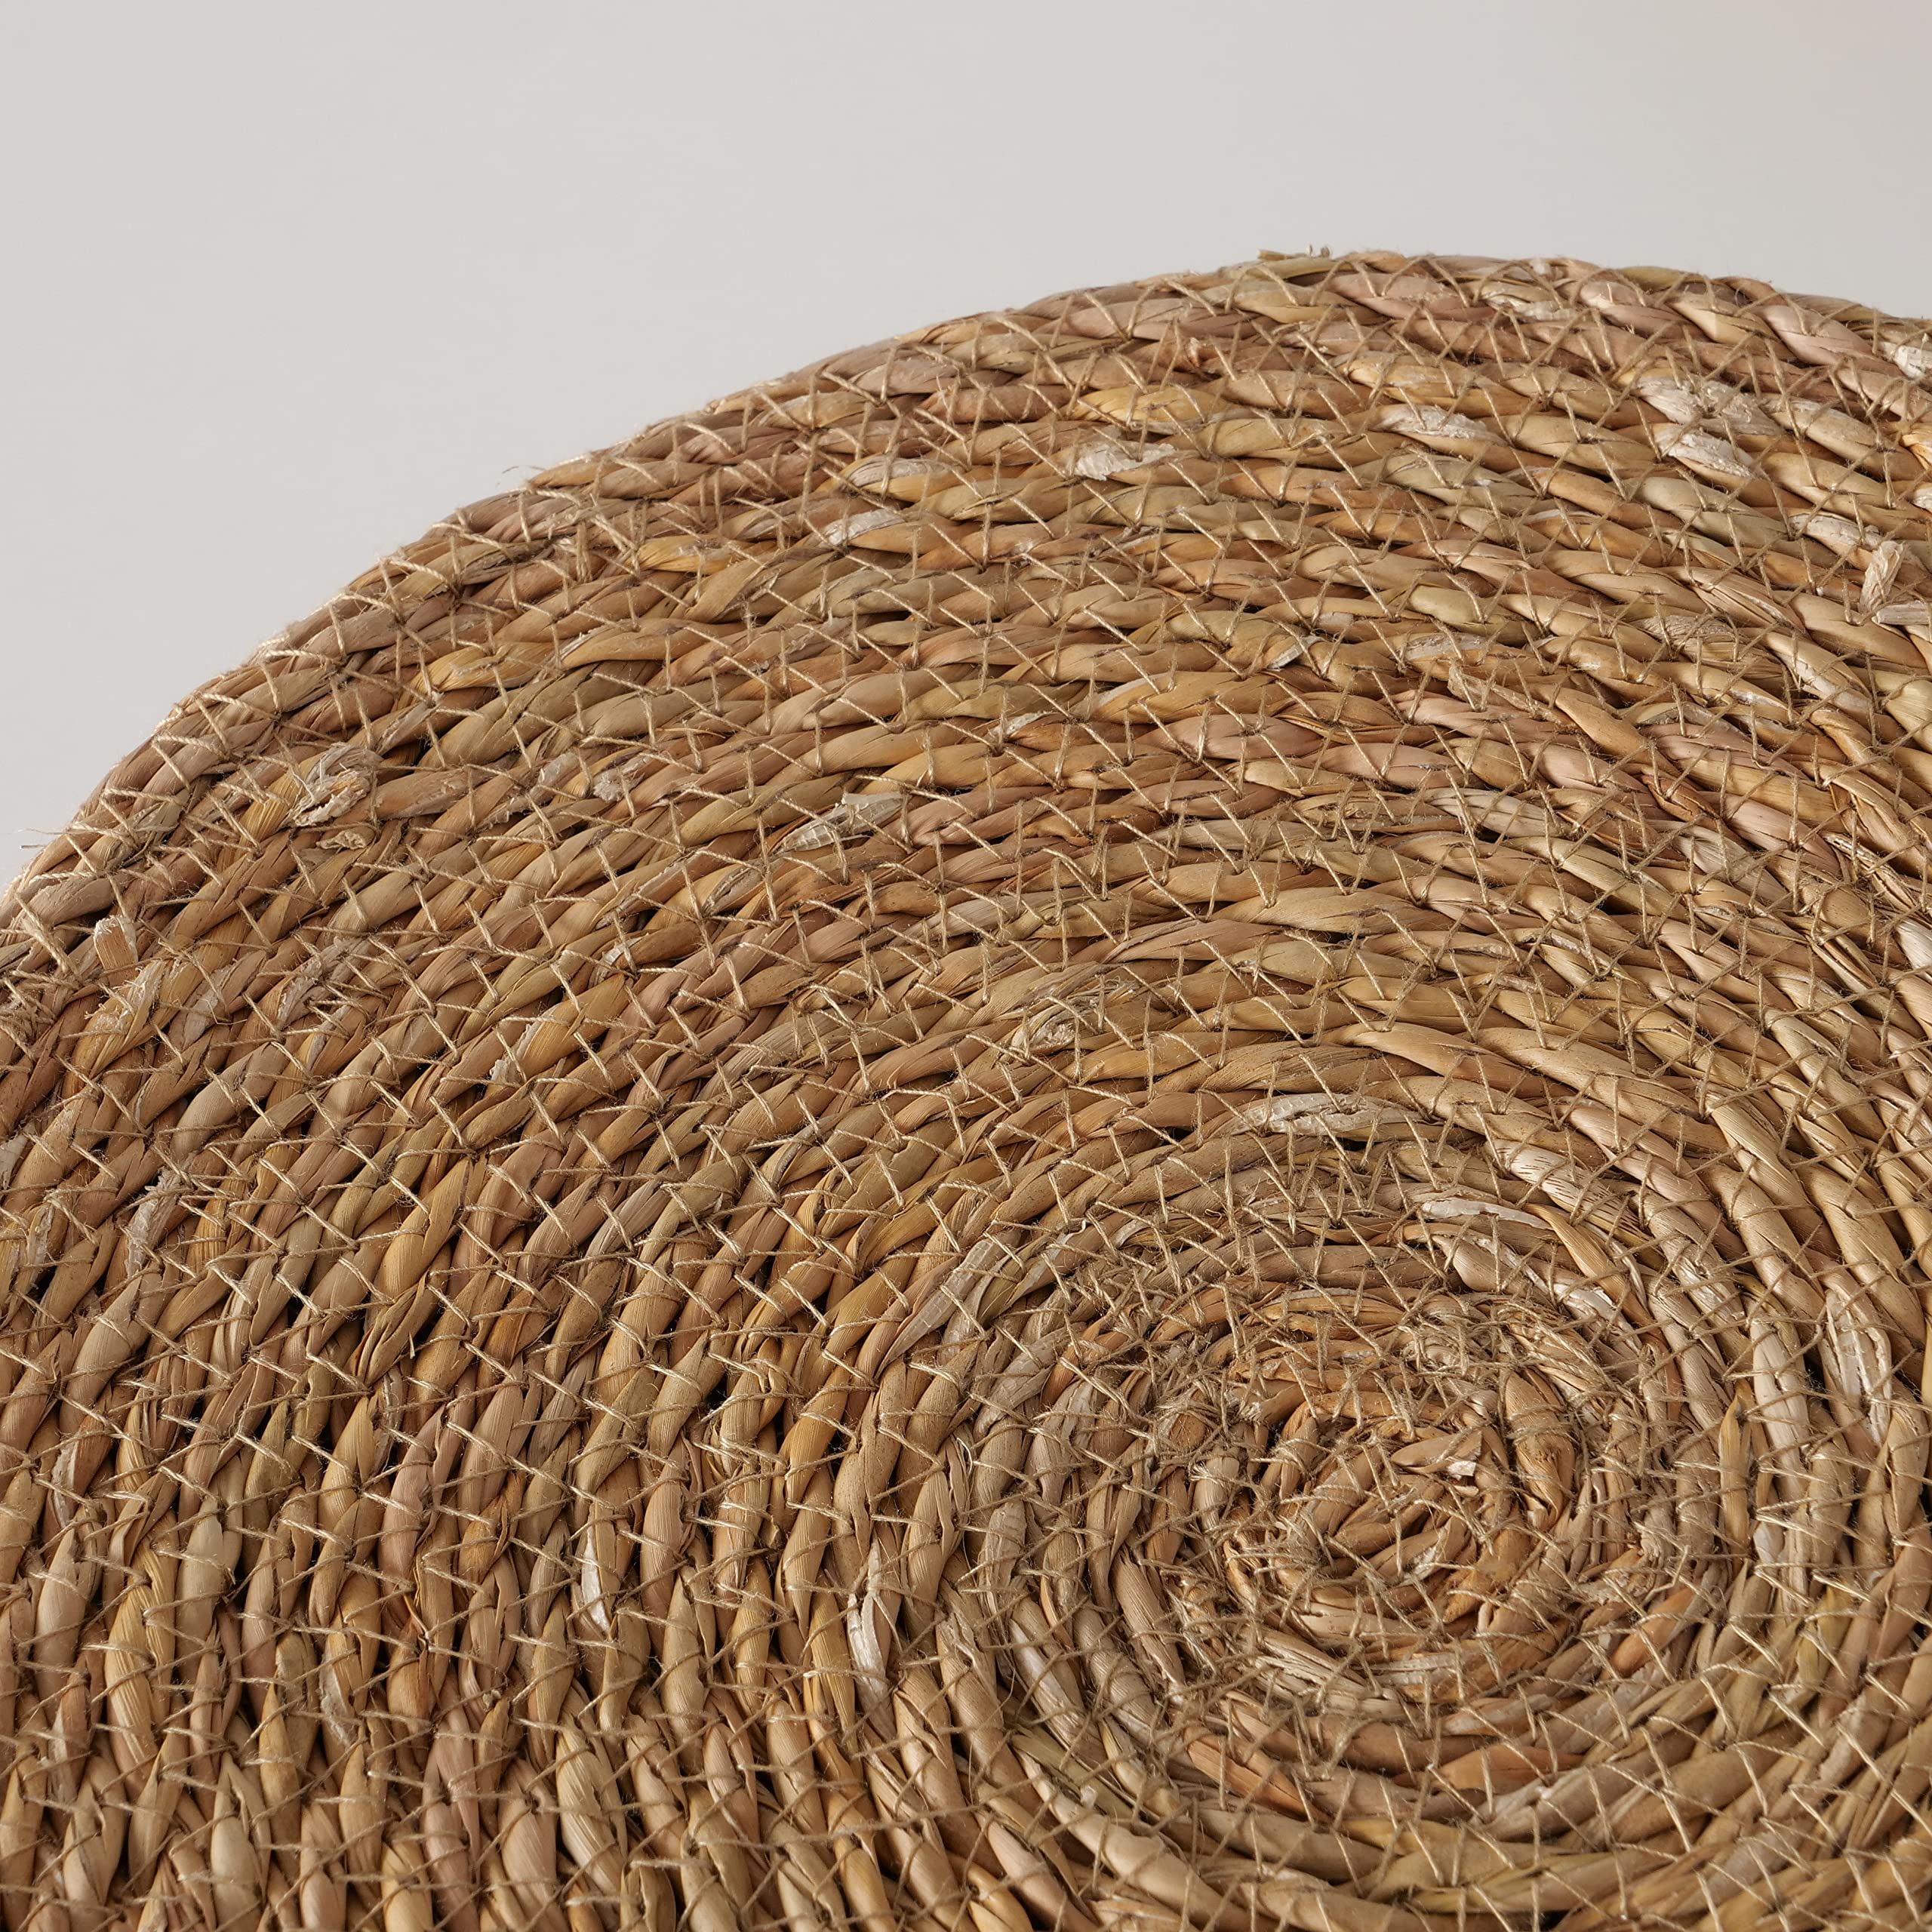 Seagrass Basket Boxes with Lids, Set of 3, Circular, Coiled Wicker Weave, Natural Seagrass, Made by Hand, 6, 7.75, and 9.75 Inches in Diameter